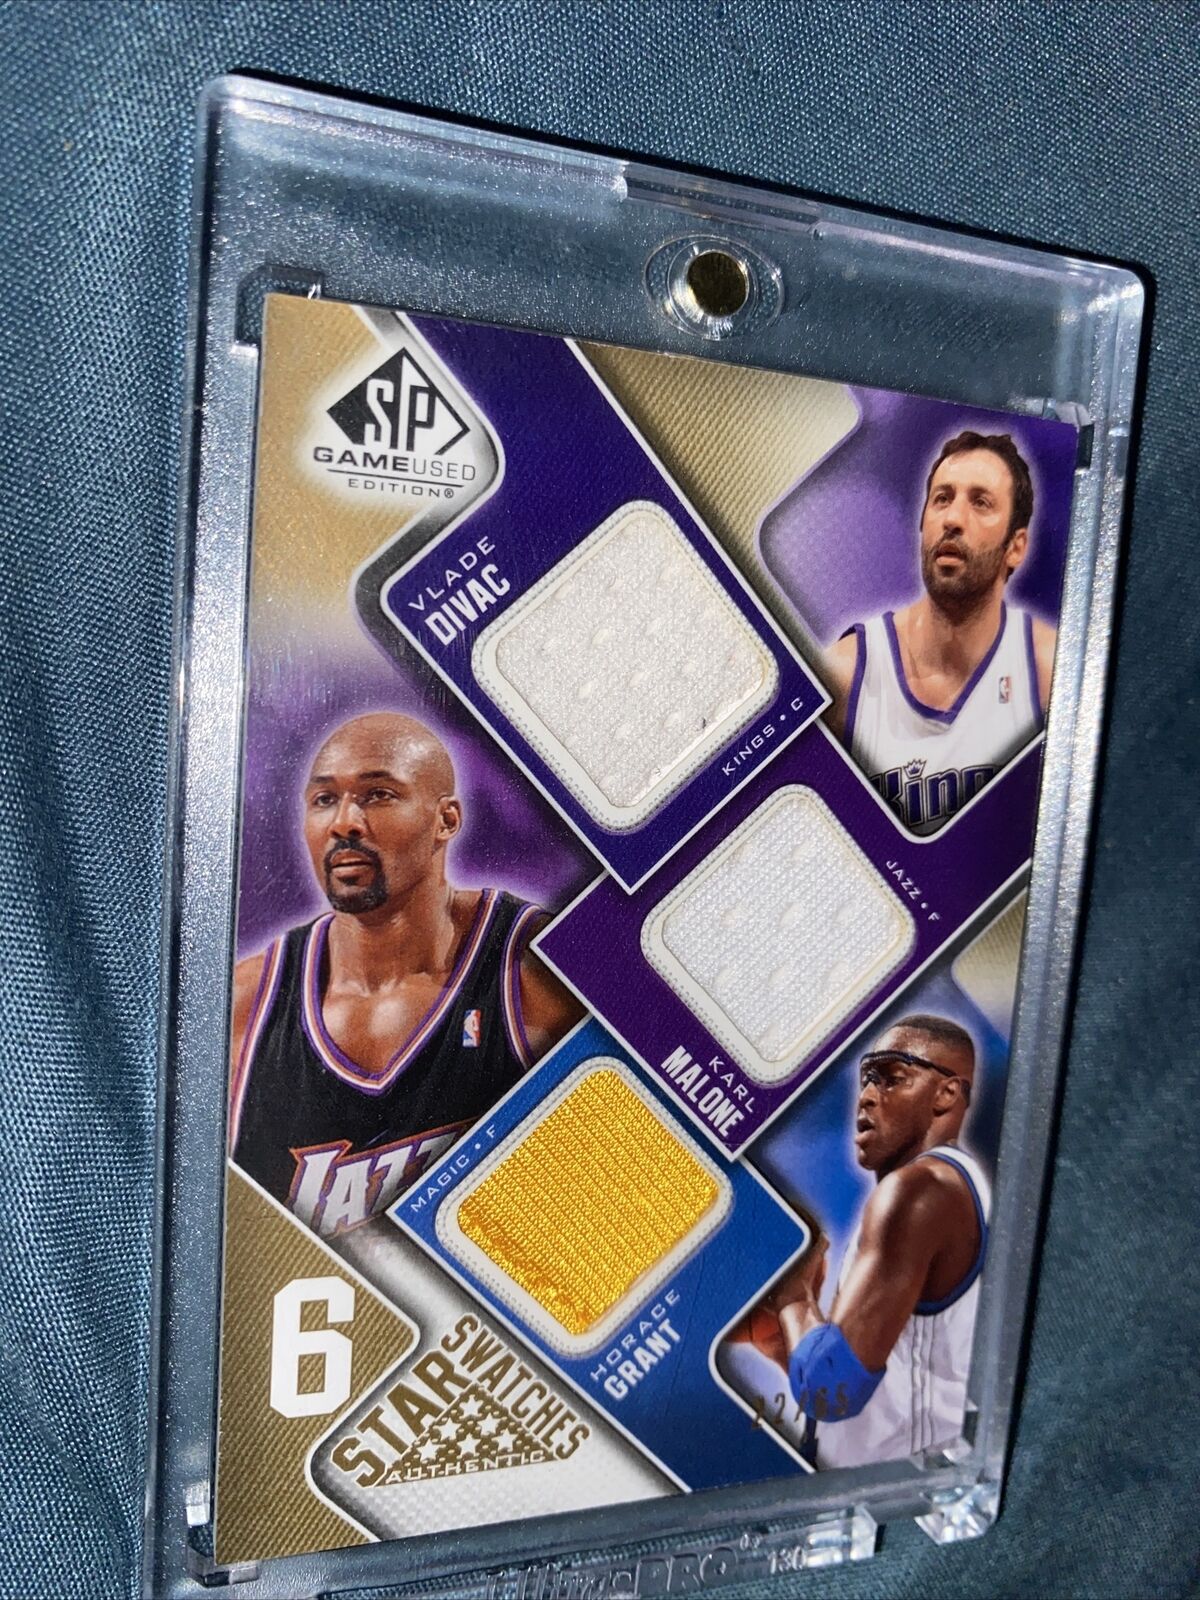 2007 SP Game Used  6 Star Swatches Kobe Bryant, Shaquille O’Neal Jersey Card